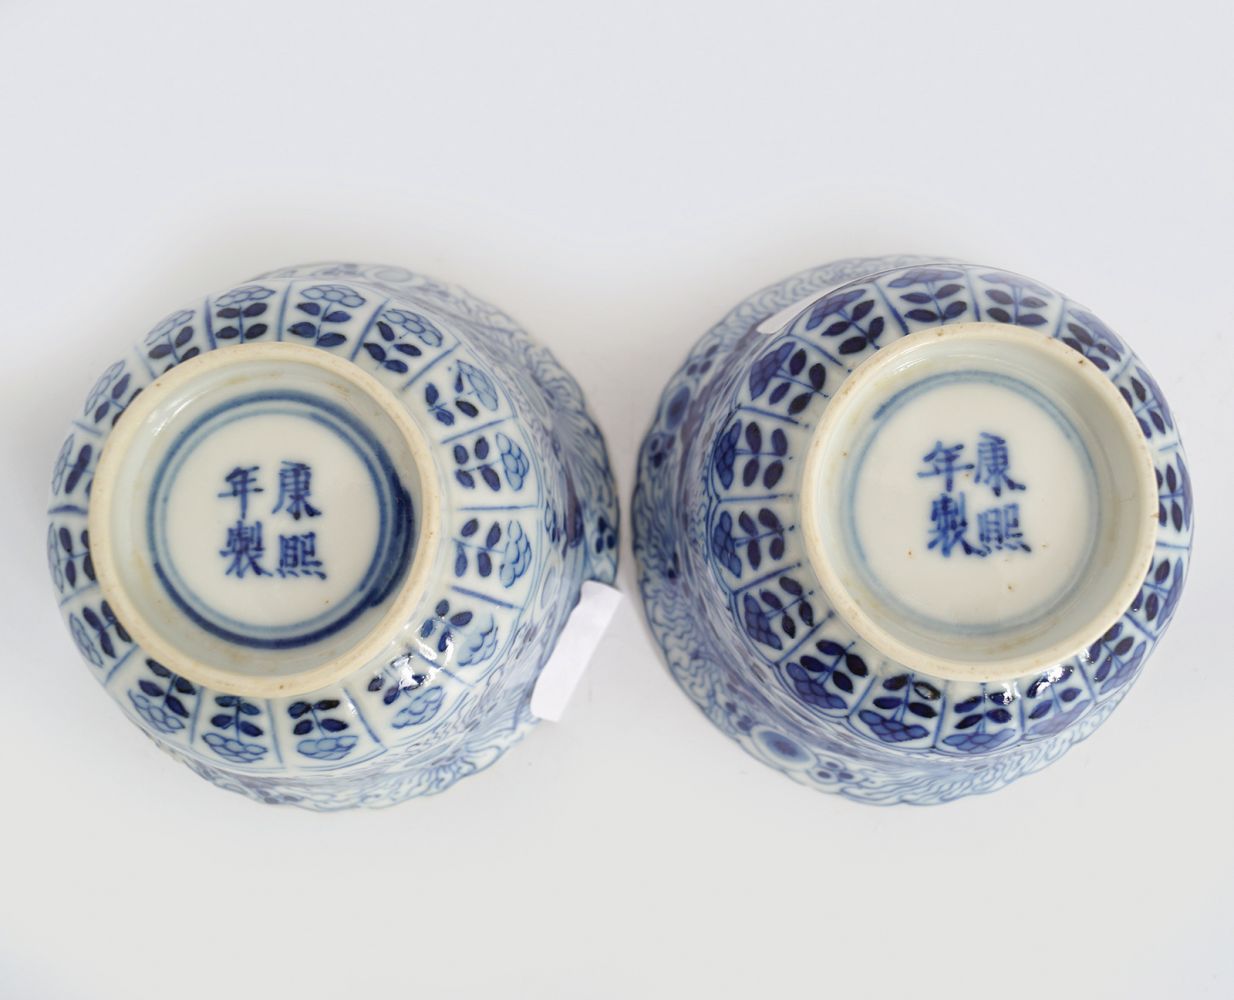 PAIR OF CHINESE BLUE AND WHITE FISHBOWLS - Image 6 of 7